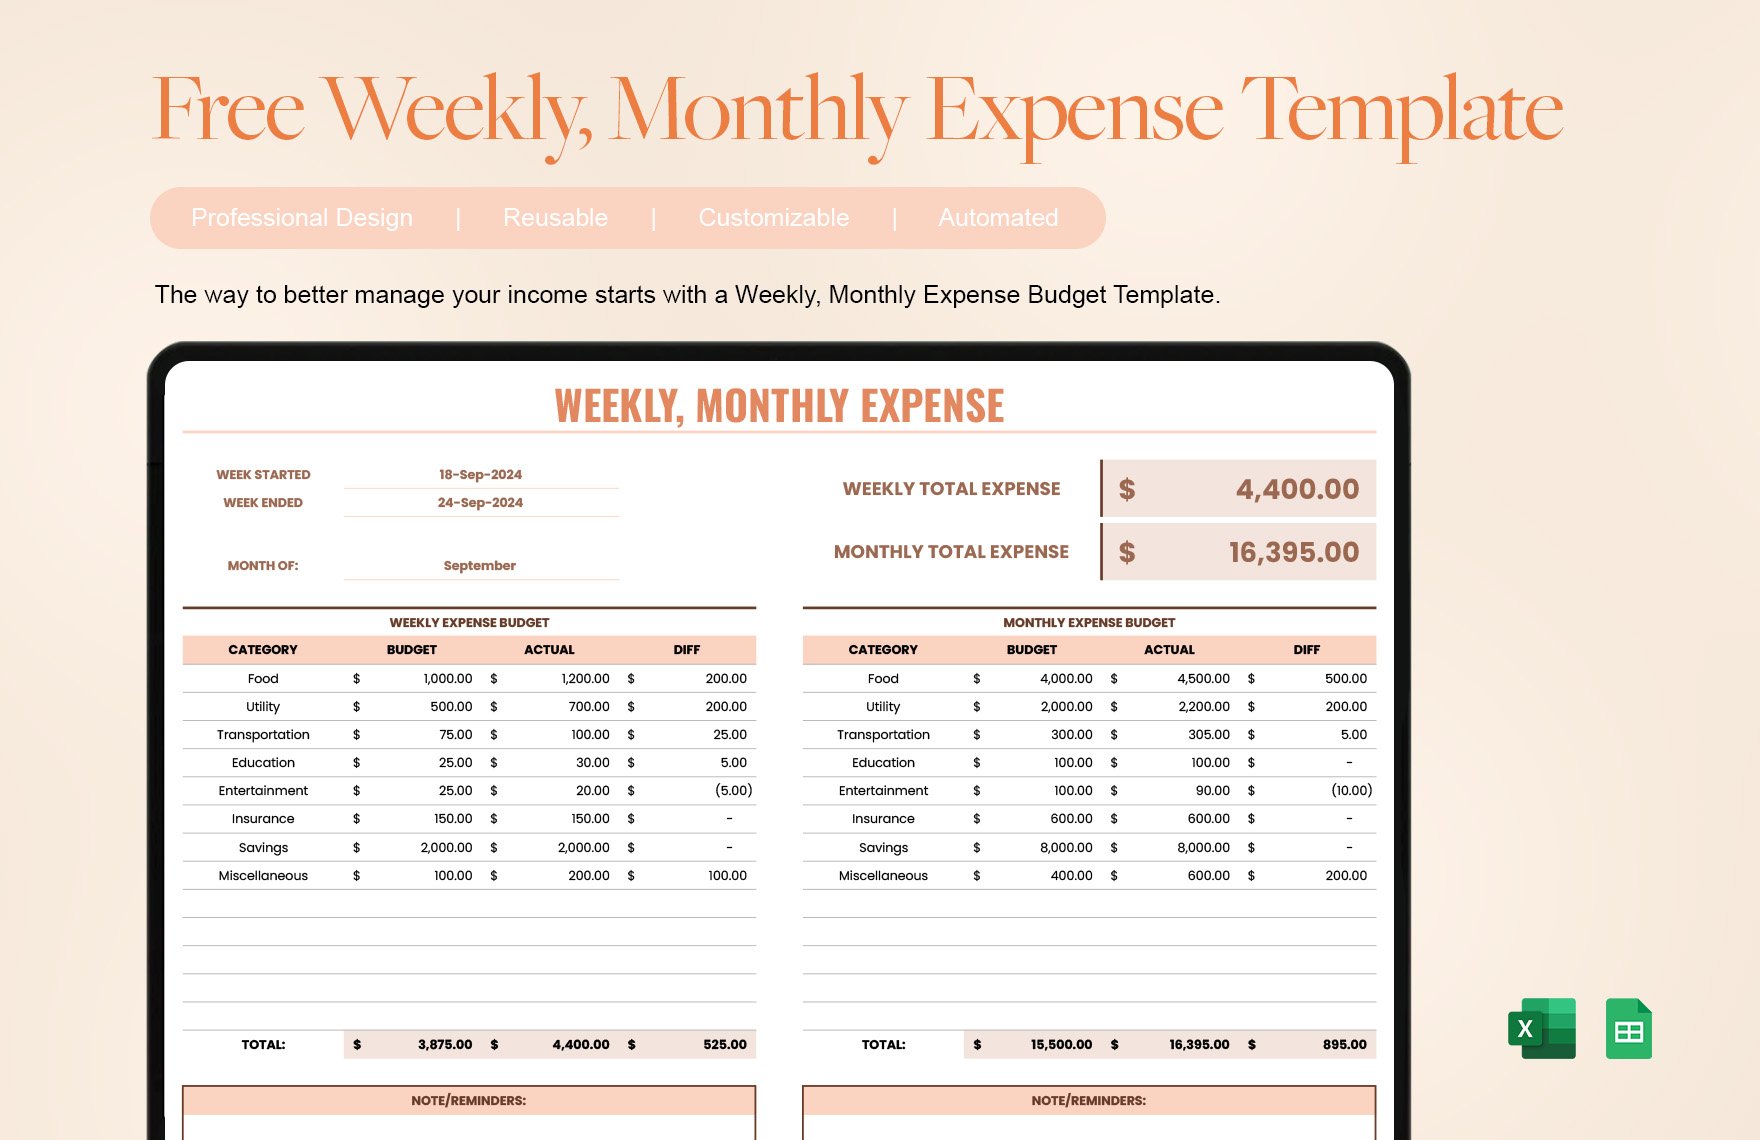 Free Weekly, Monthly Expense Template